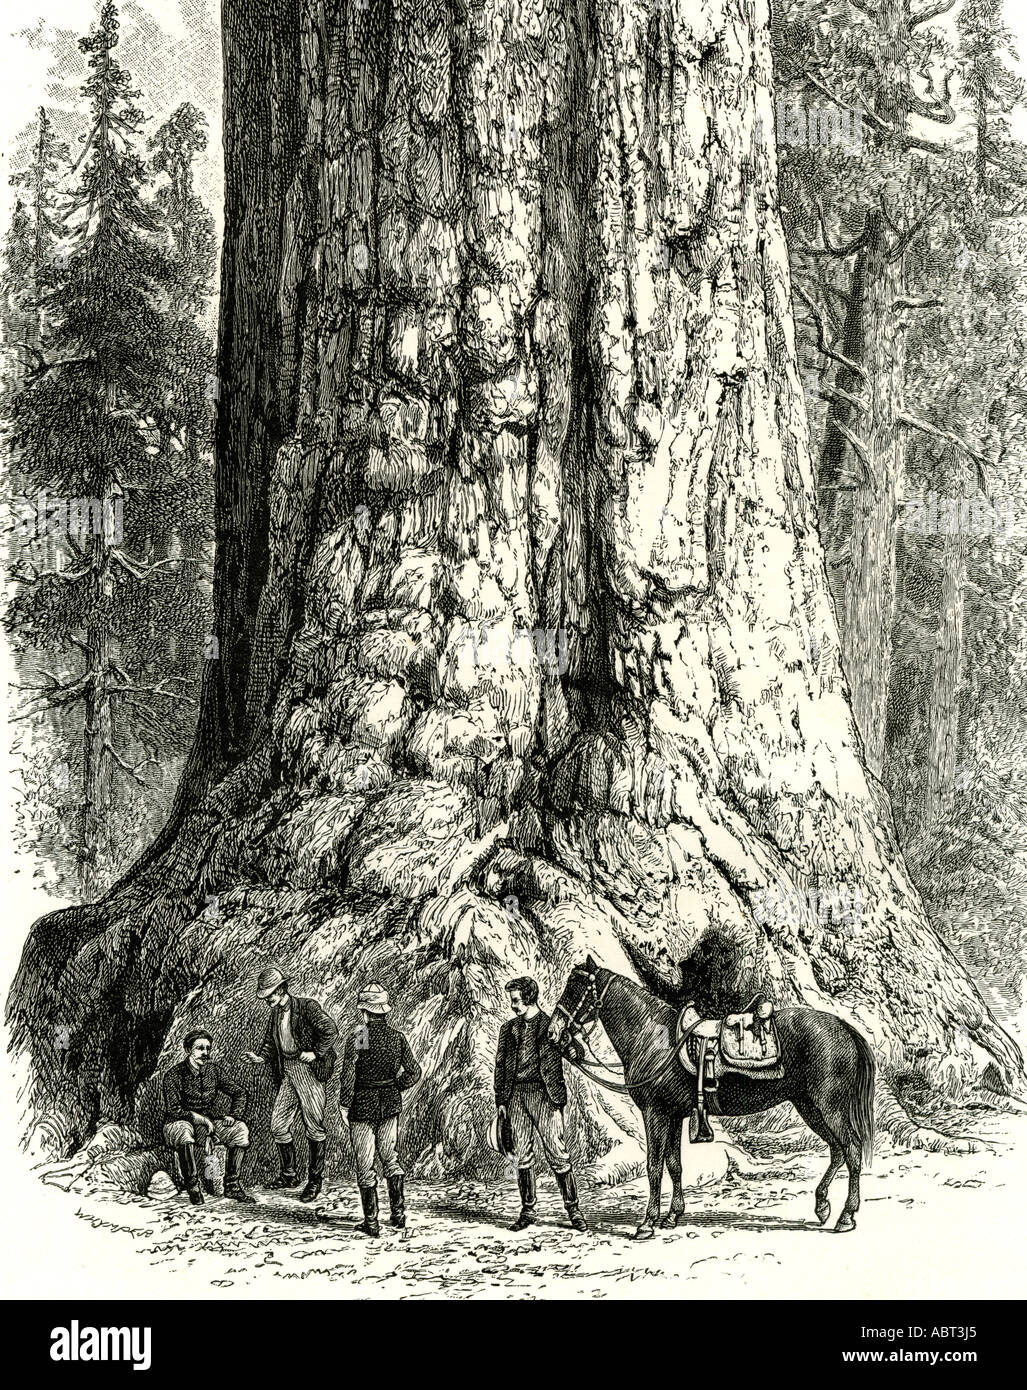 Yosemite Valley, The Grizzly Giant, USA, 1891 Stock Photo